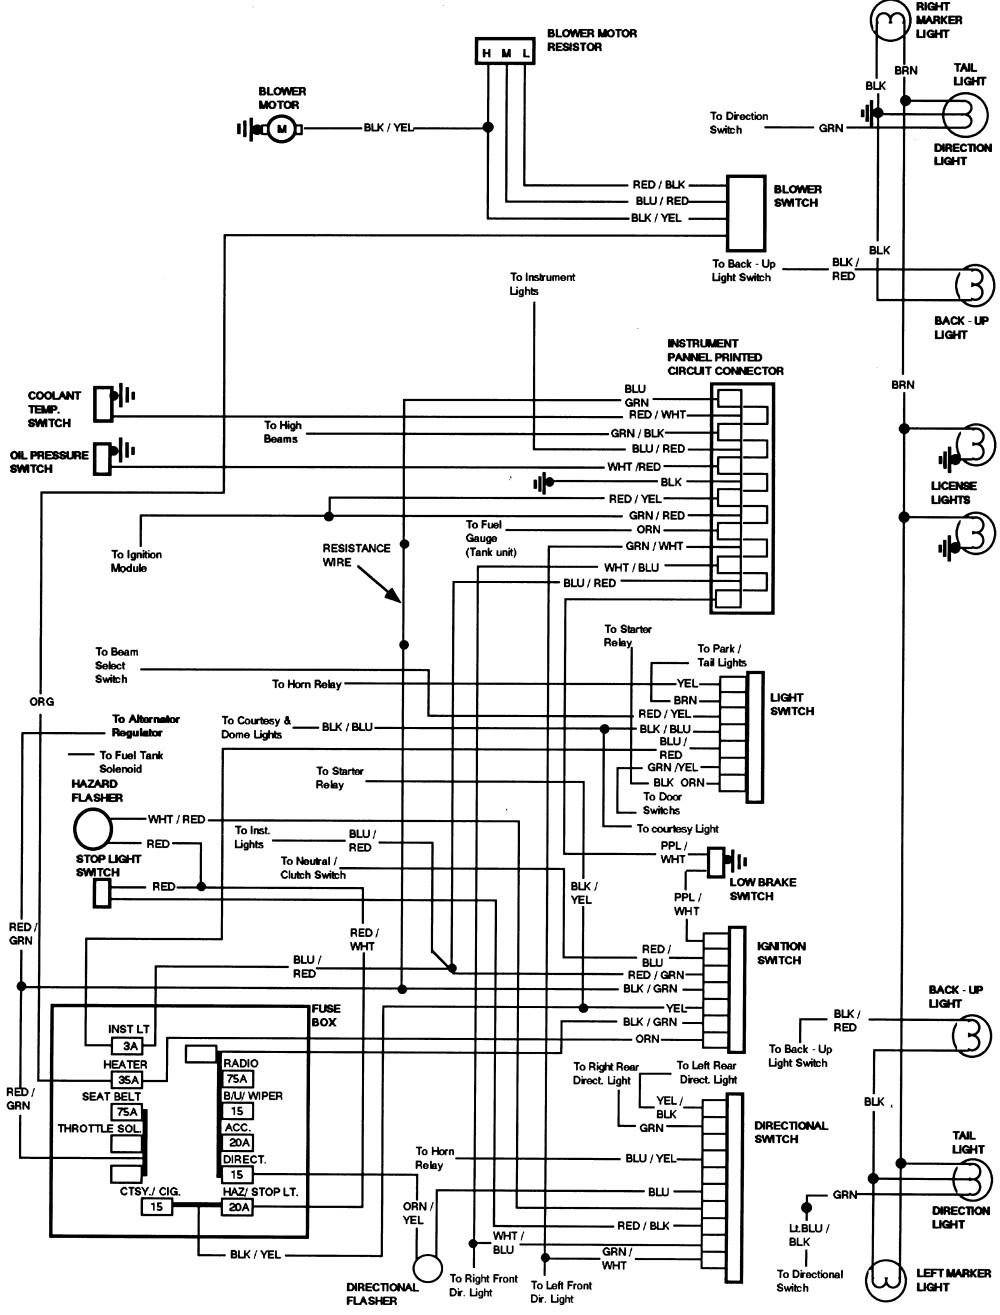 76 ford wire harness wiring diagram ford wiring harness connectors 1979 ford factory radio wiring wiring